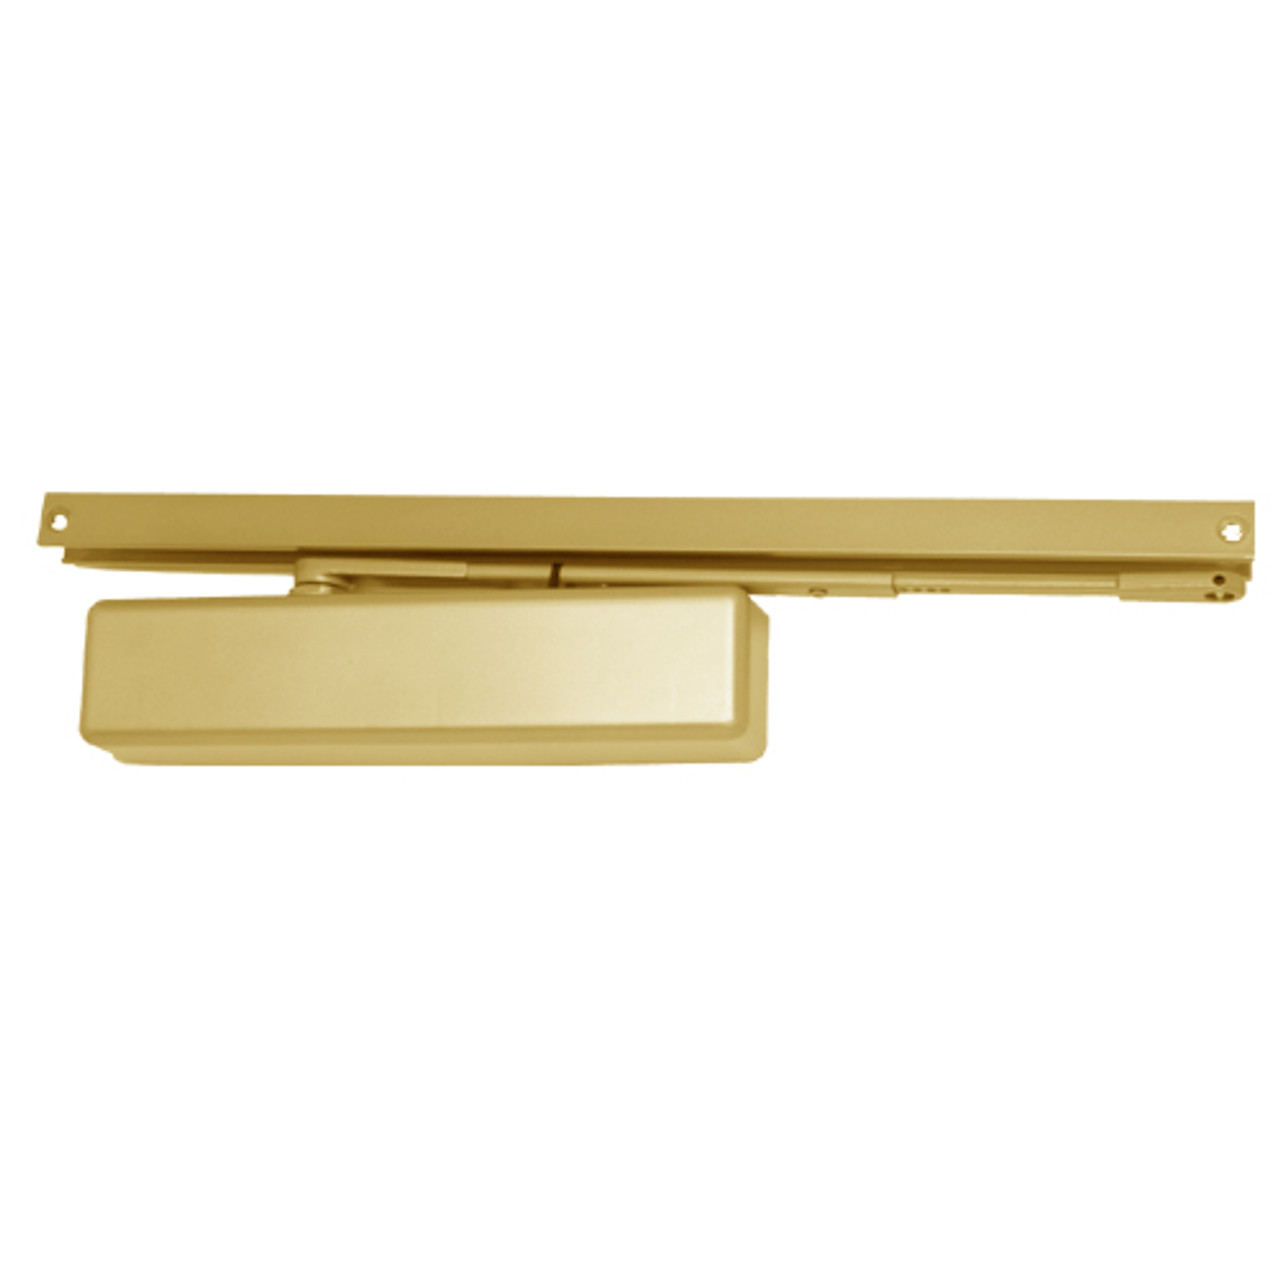 1460T-BUMPER-US3-DS LCN Surface Mount Door Closer with Bumper Arm in Bright Brass Finish